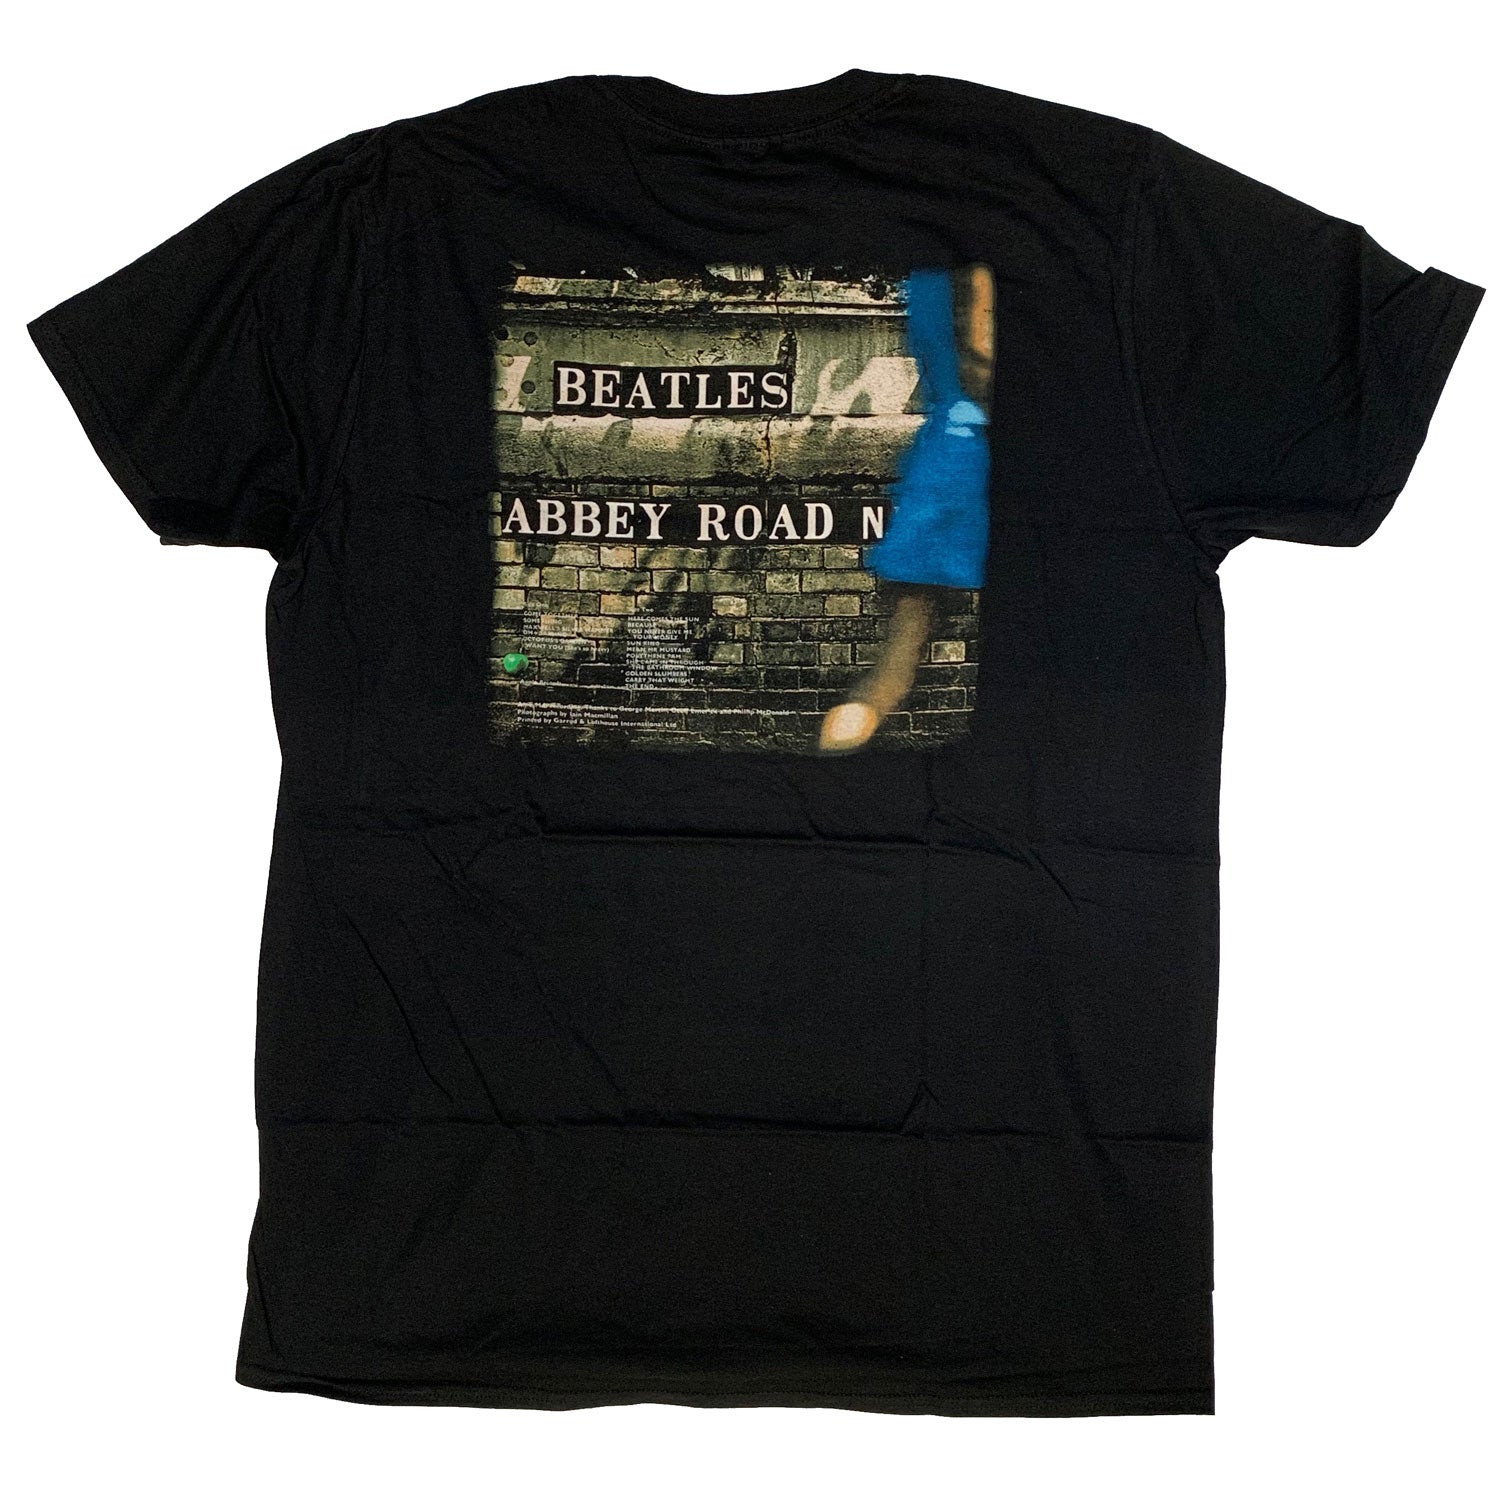 The Beatles T Shirt - Abbey Road Original Vinyl Cover 100% Official With Backprint